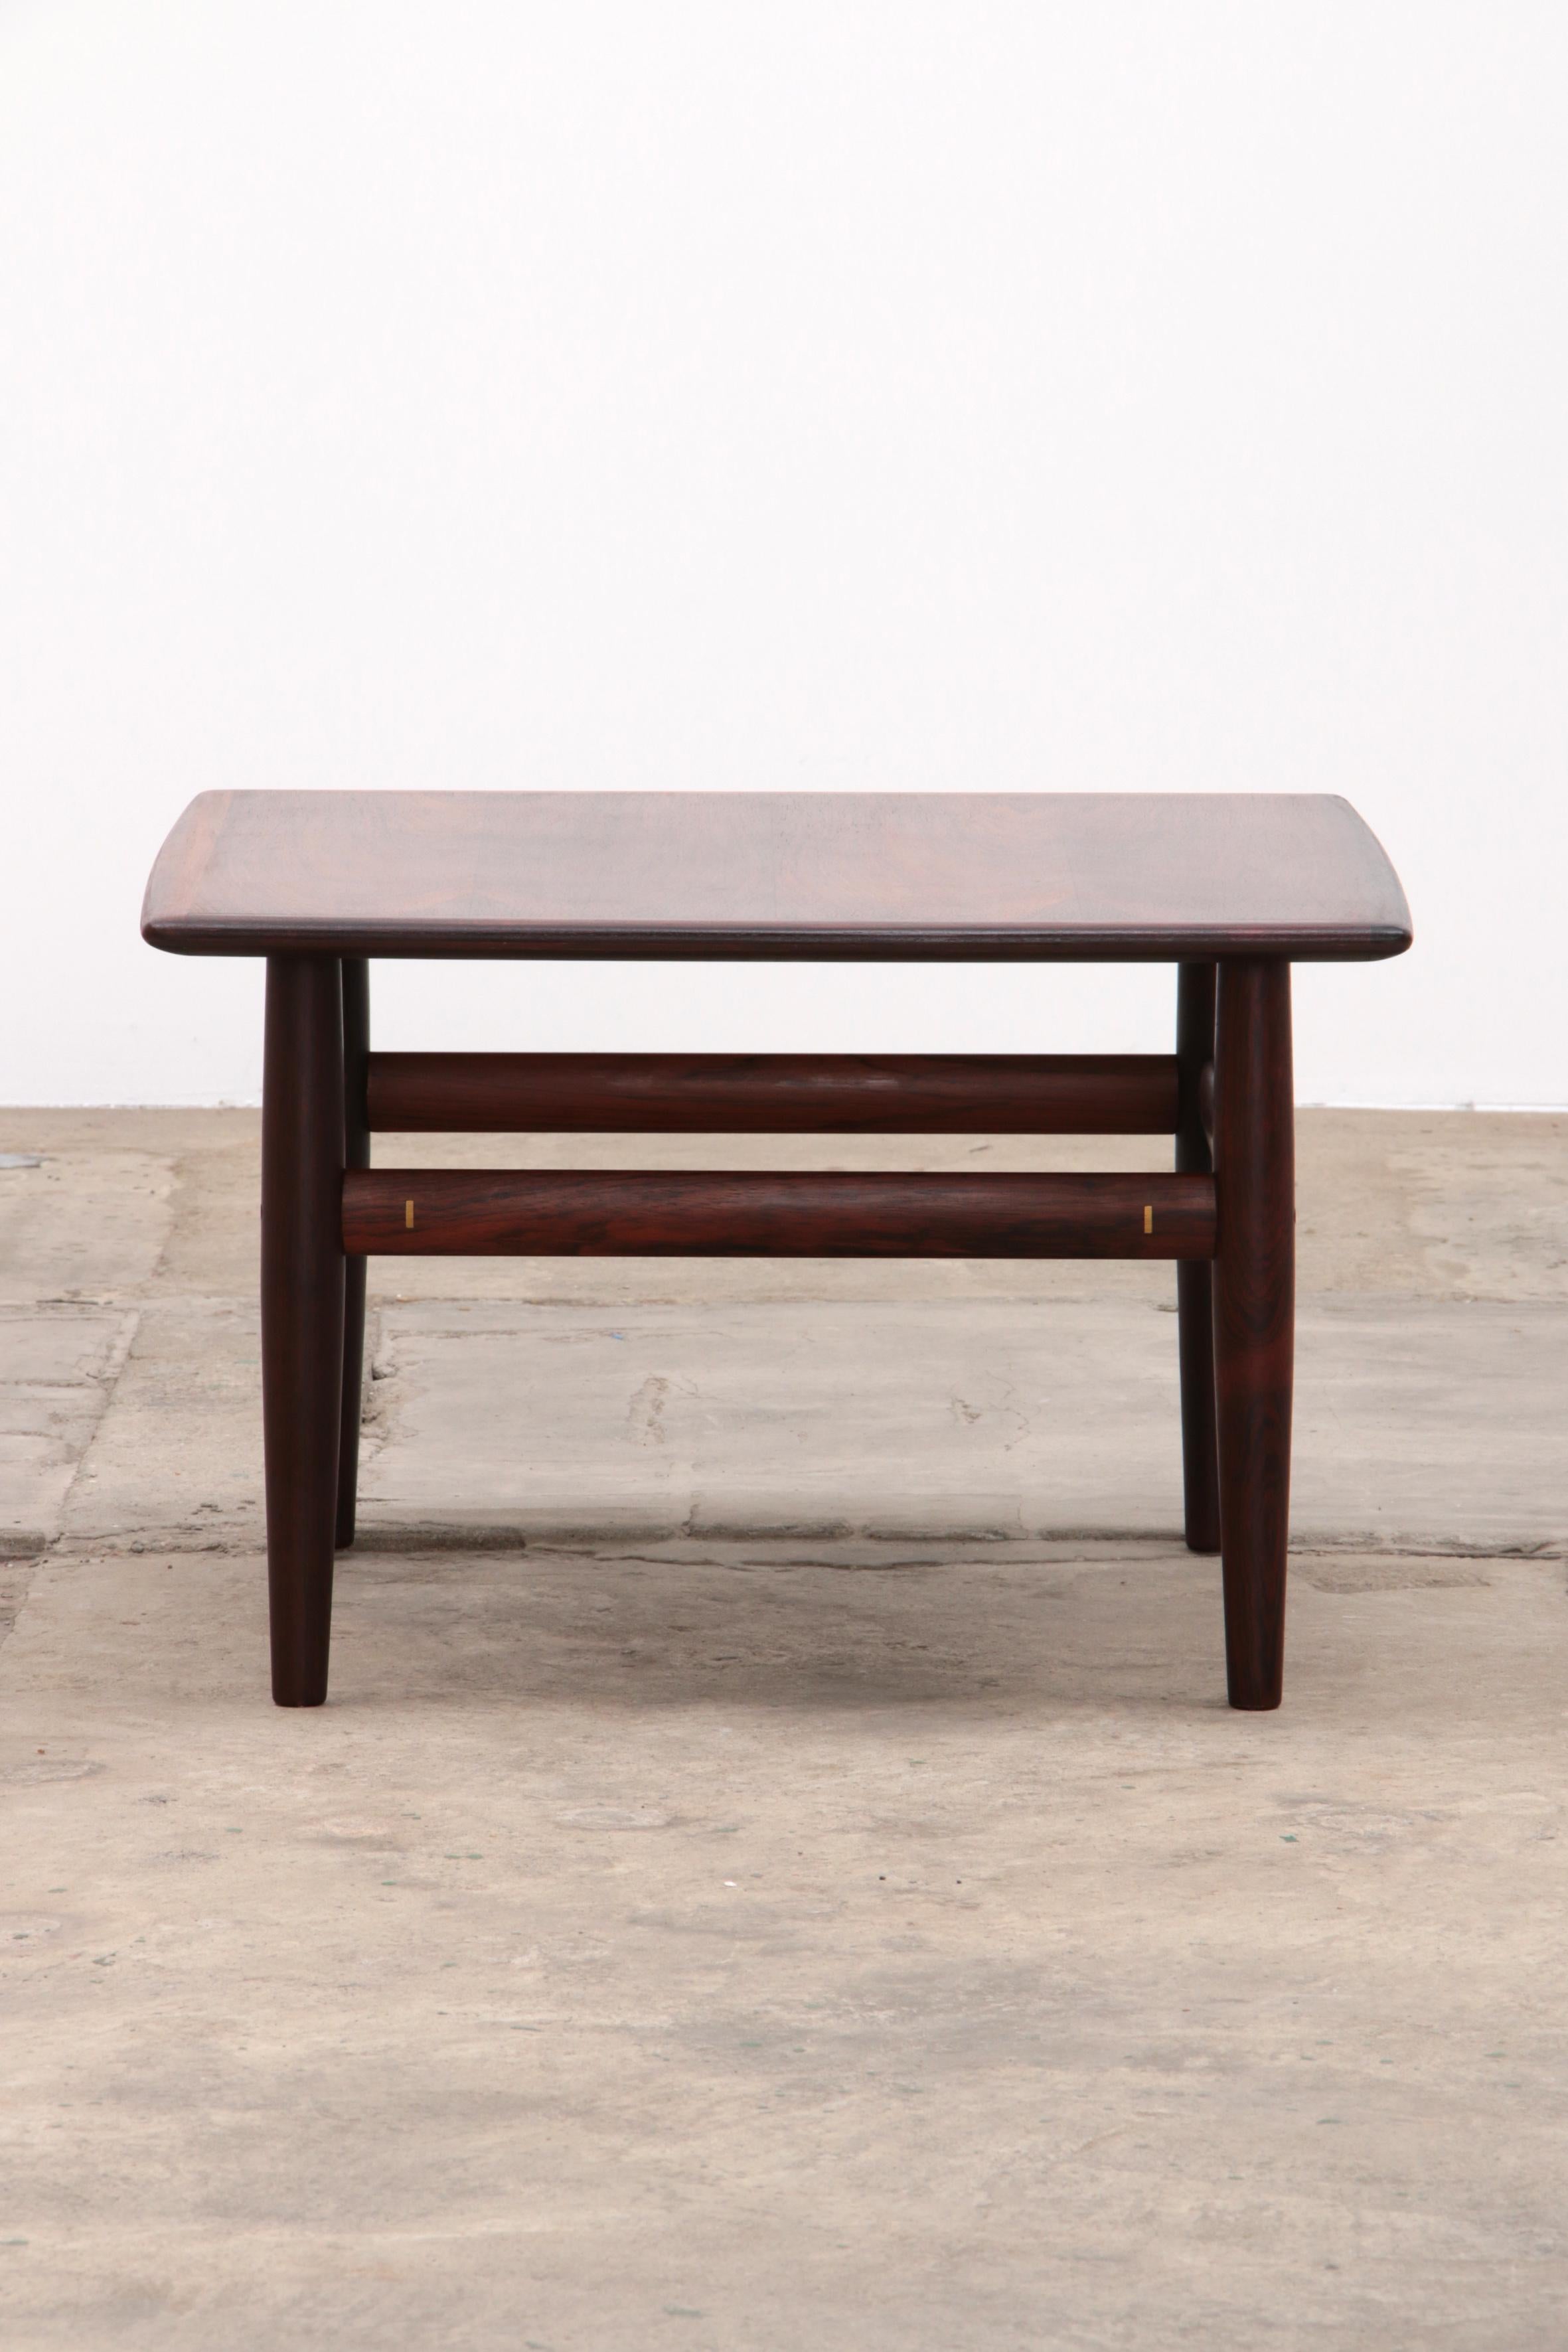 Mid-20th Century Rosewood Coffee Table by Grete Jalk for Glostrup, 1968 Denmark. For Sale